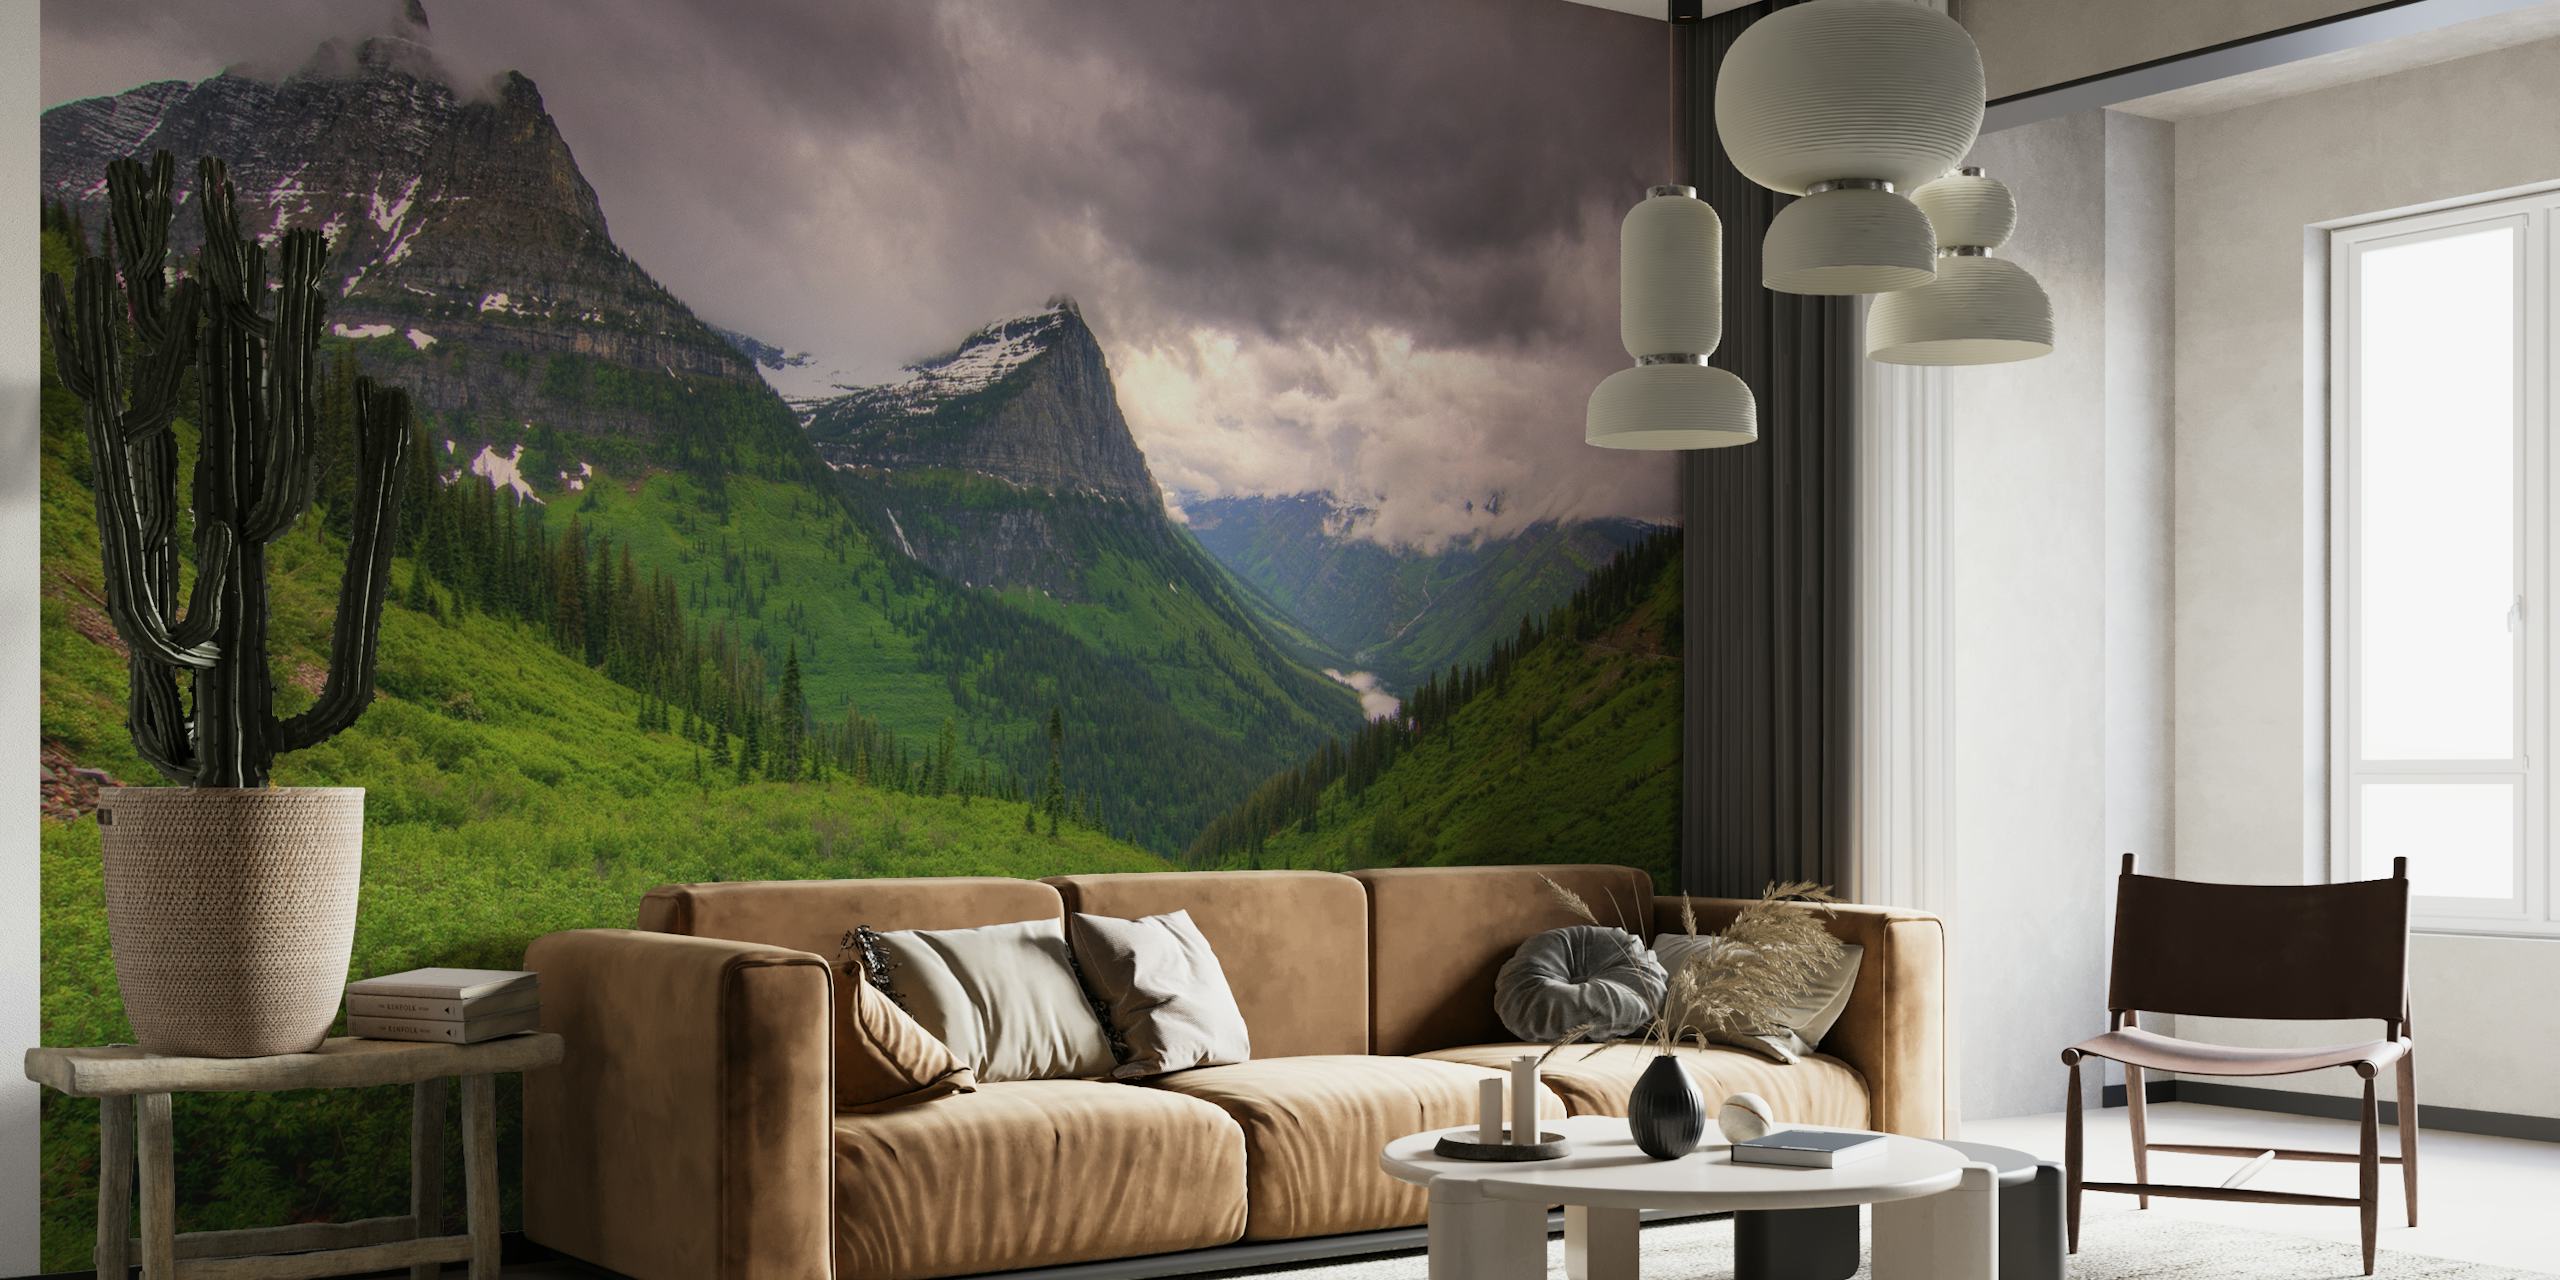 Approaching Storm wall mural with dark, stormy skies and lush green landscape